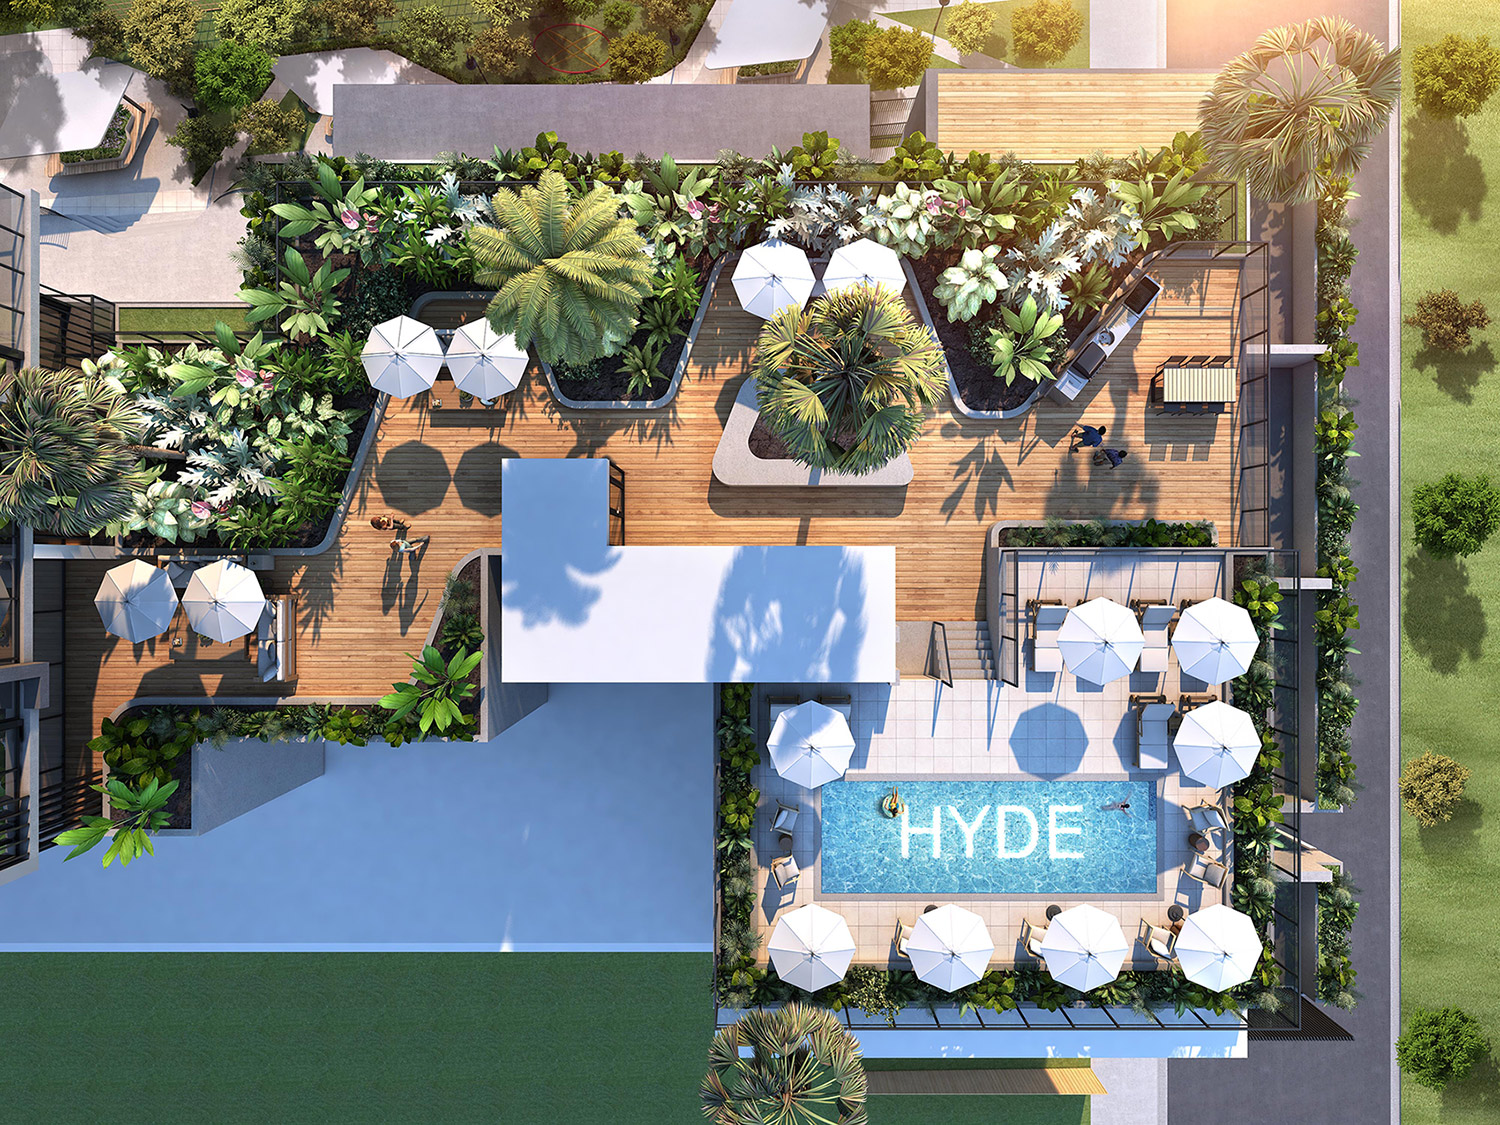 1500uup 3 9740 2 Hyde Mixed Use, Wollongong Additional S30401a 0621 C05